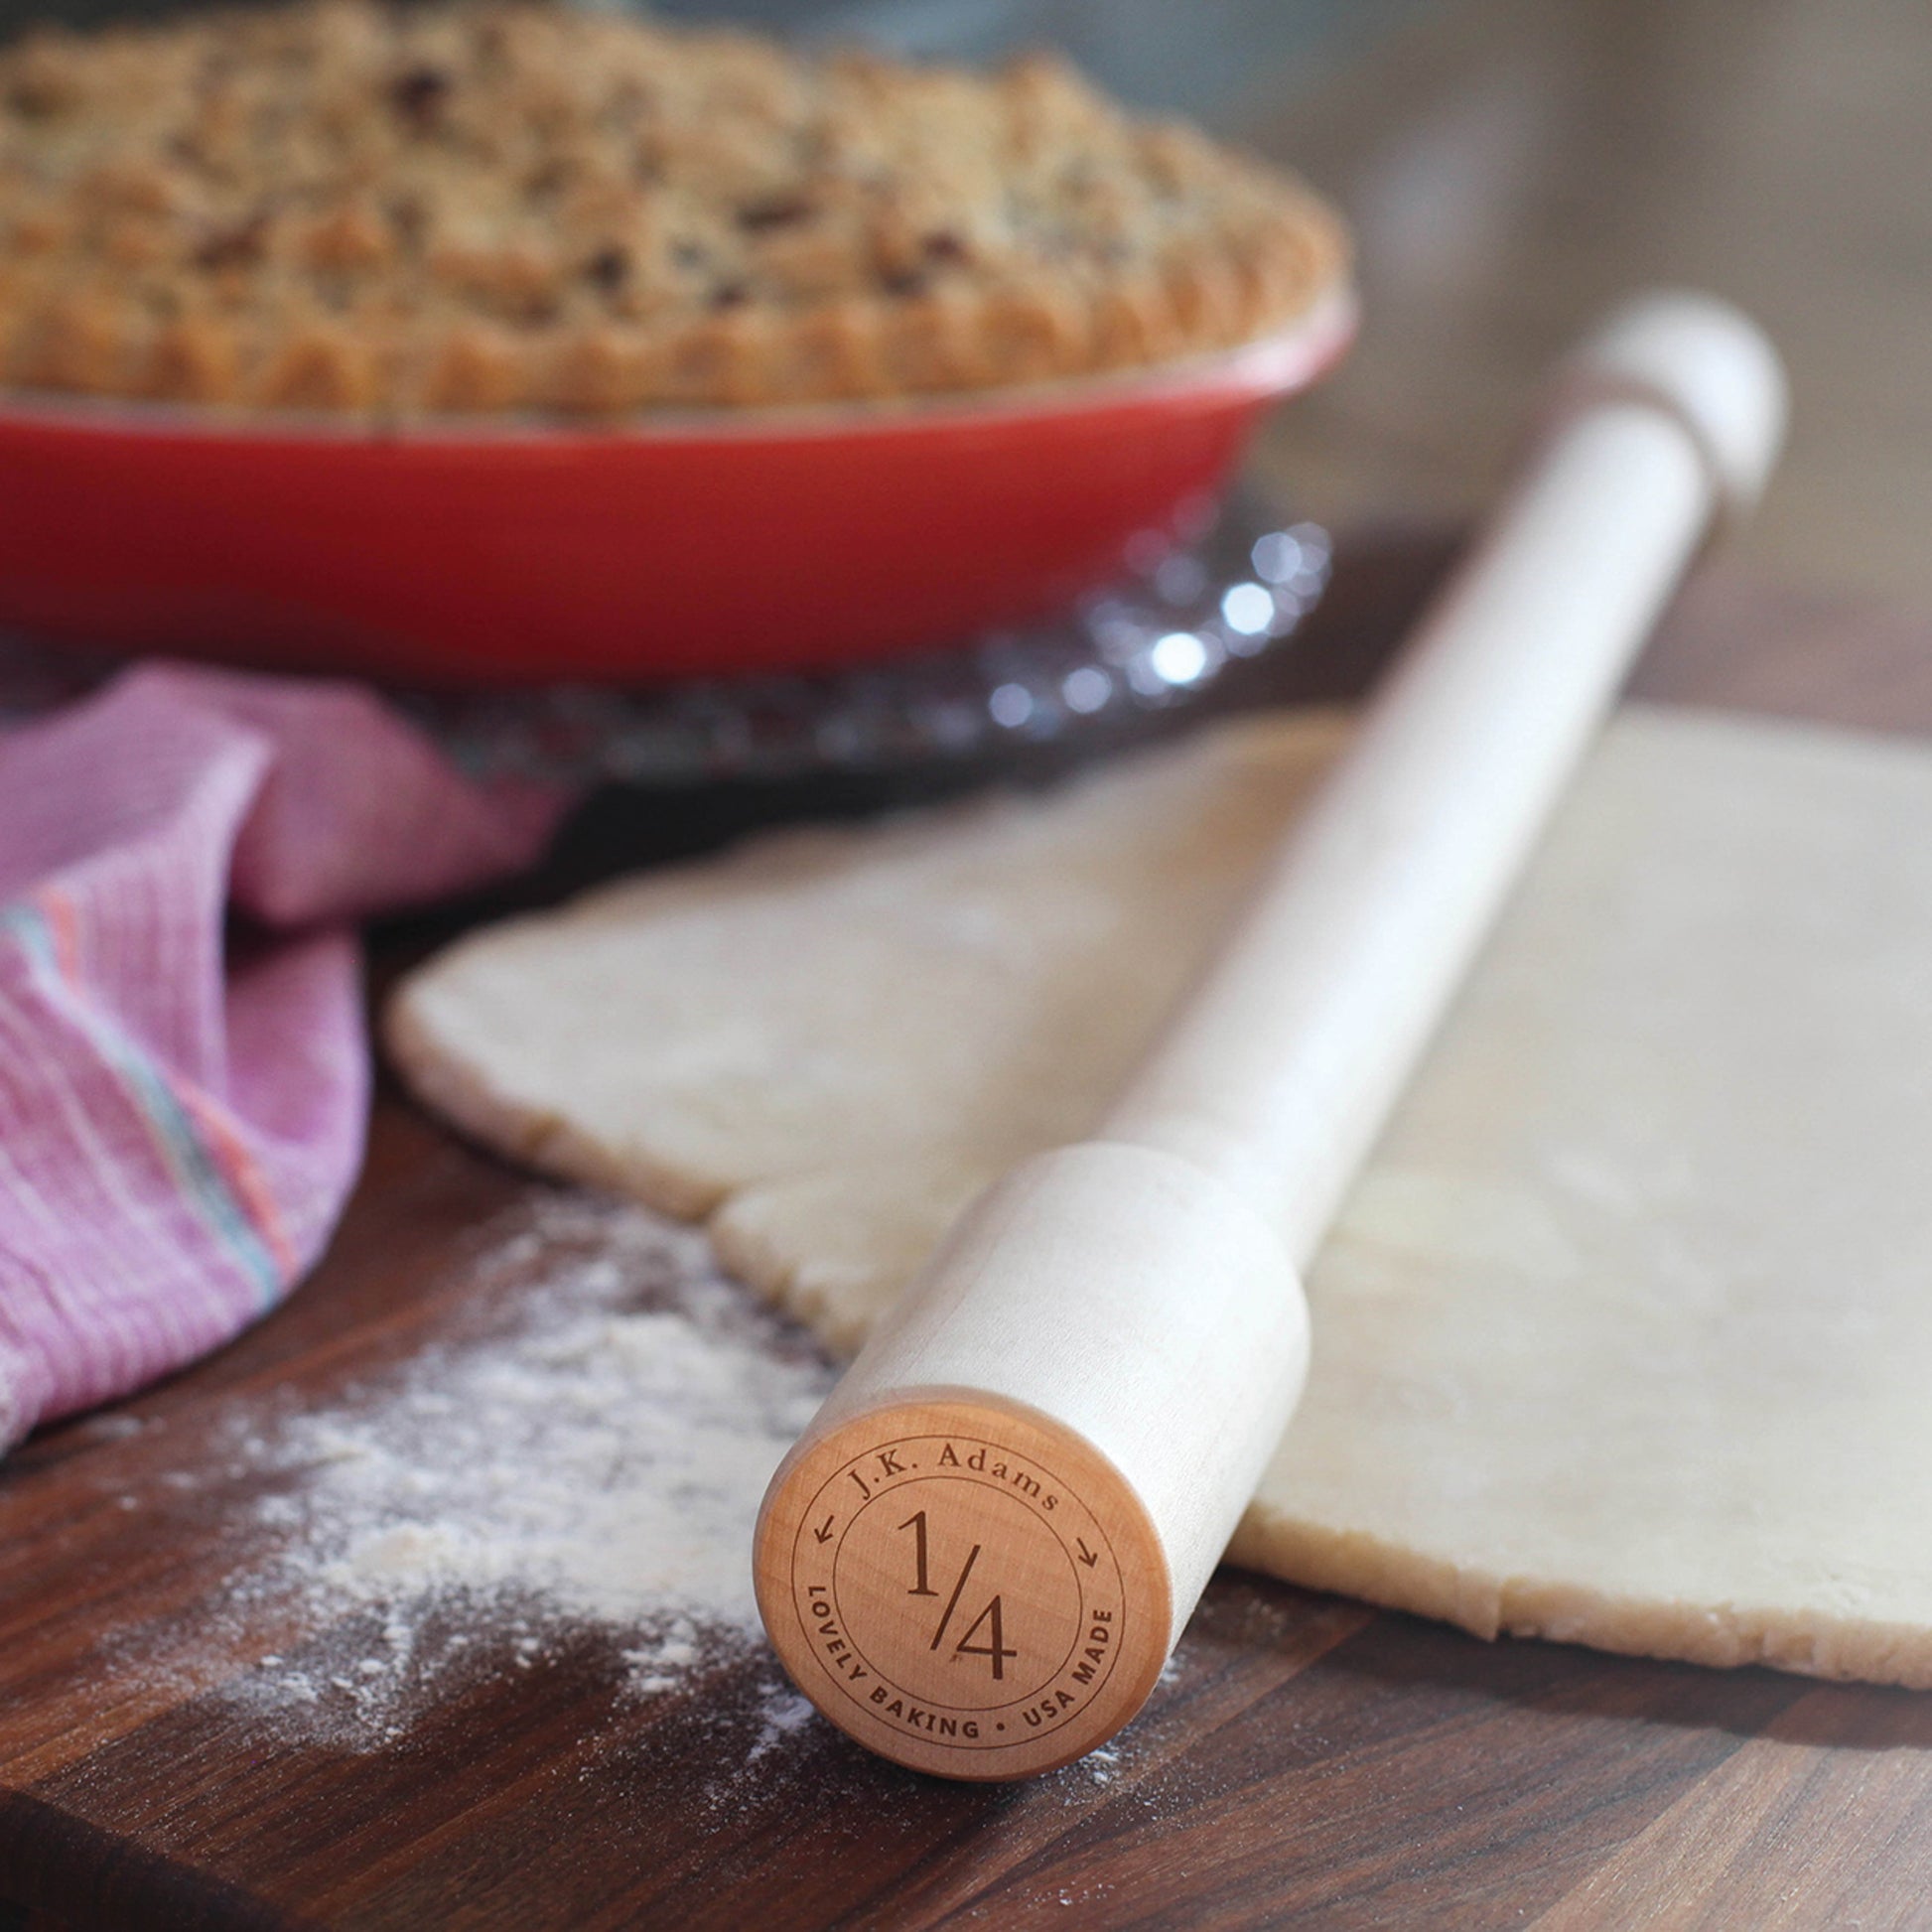 8 of the best rolling pins for pastry and more